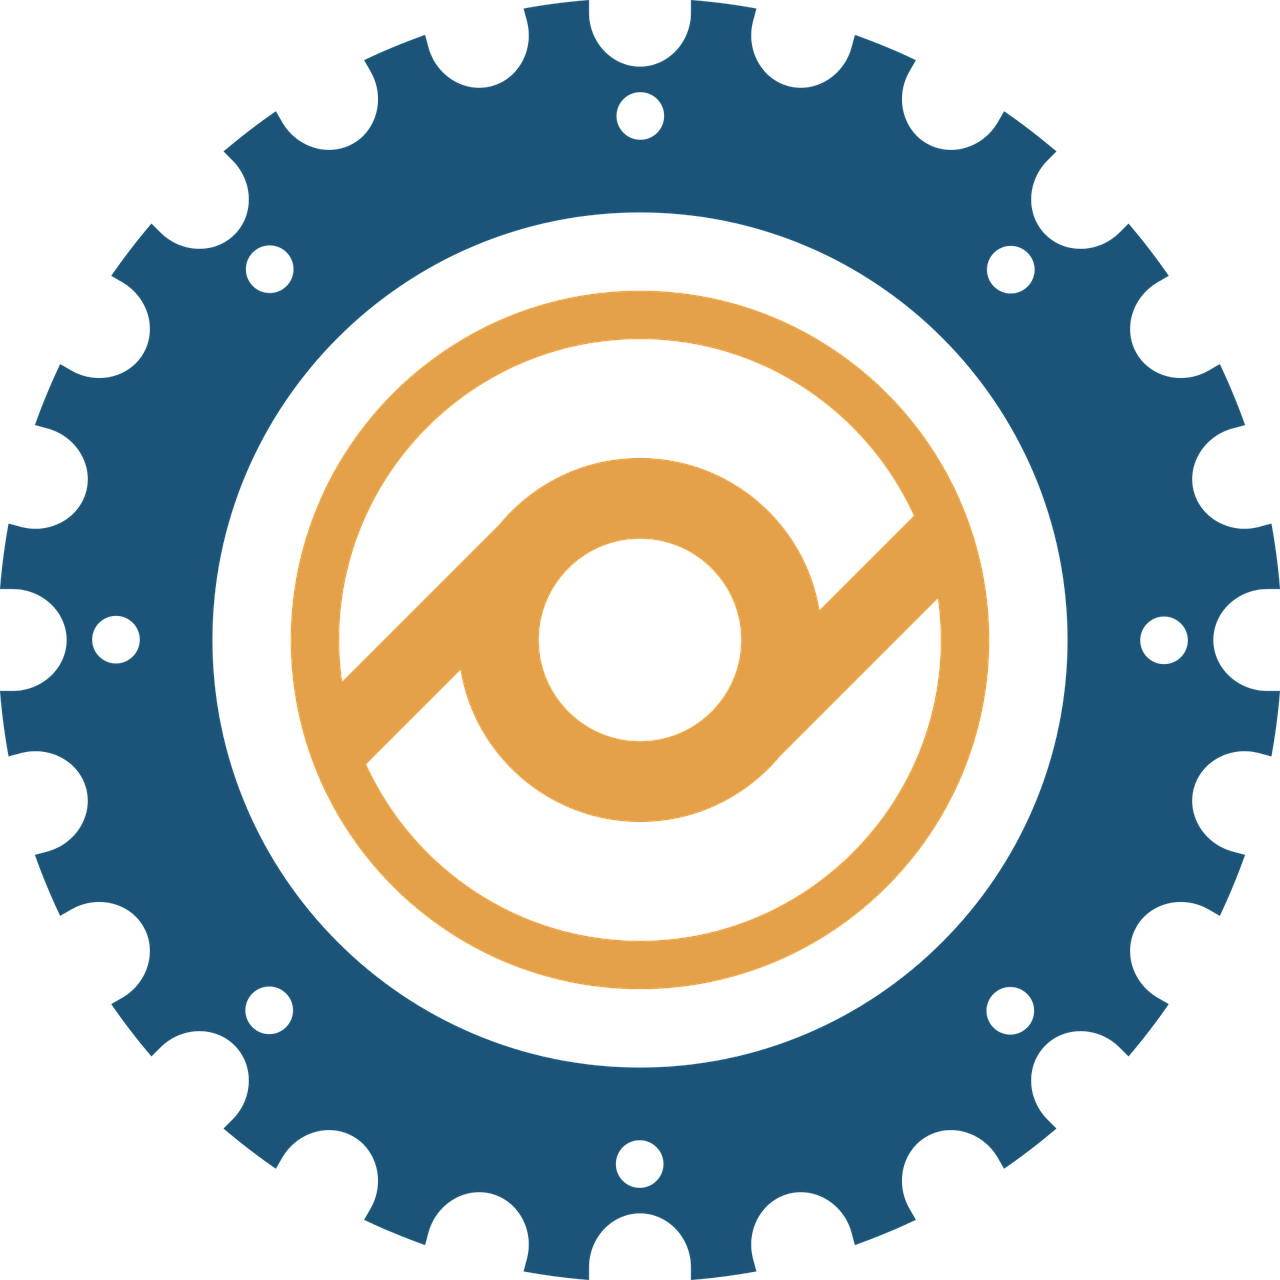 a blue and yellow logo on a black background, inspired by Kōno Michisei, polycount, incoherents, cogs and wheels, sacral chakra, discord profile picture, black mesa